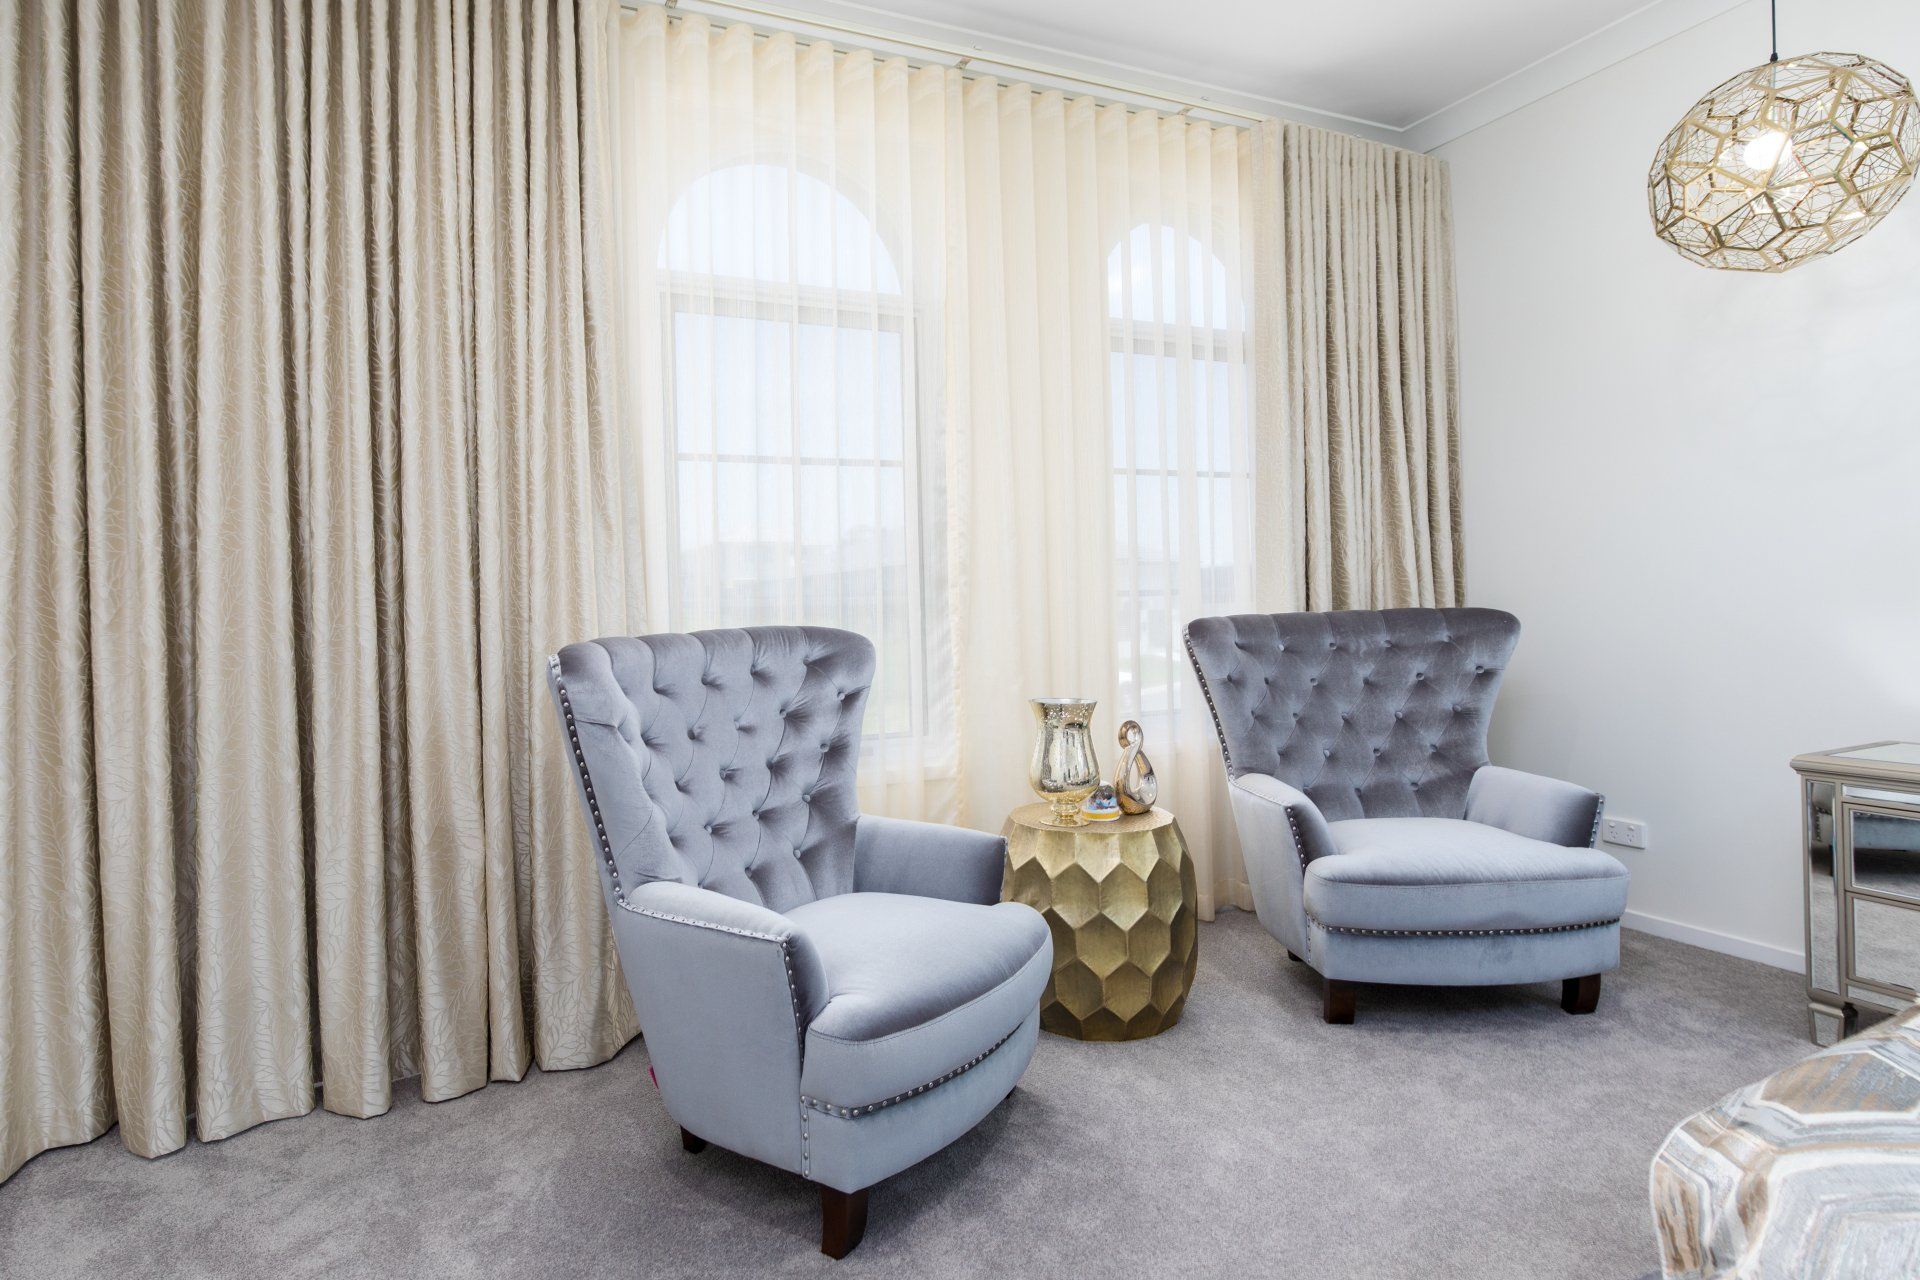 Quality Curtains & Blinds Indooroopilly